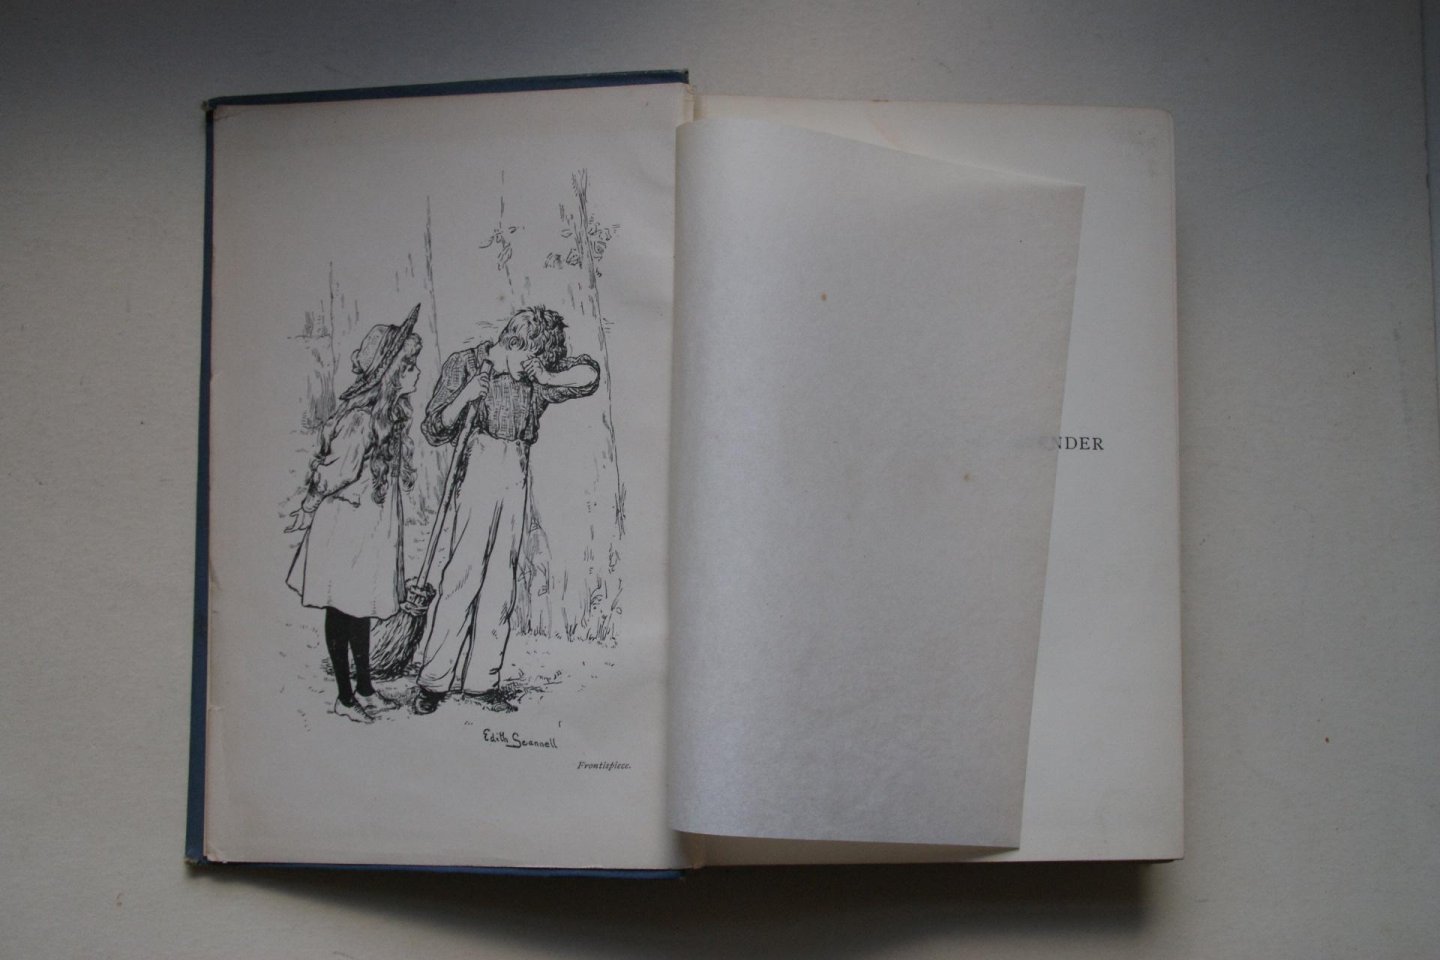 Elmsly, Theodora C. - The Little Lady Of Lavender  Illustrated by Edith Scannell  & H.L.E.